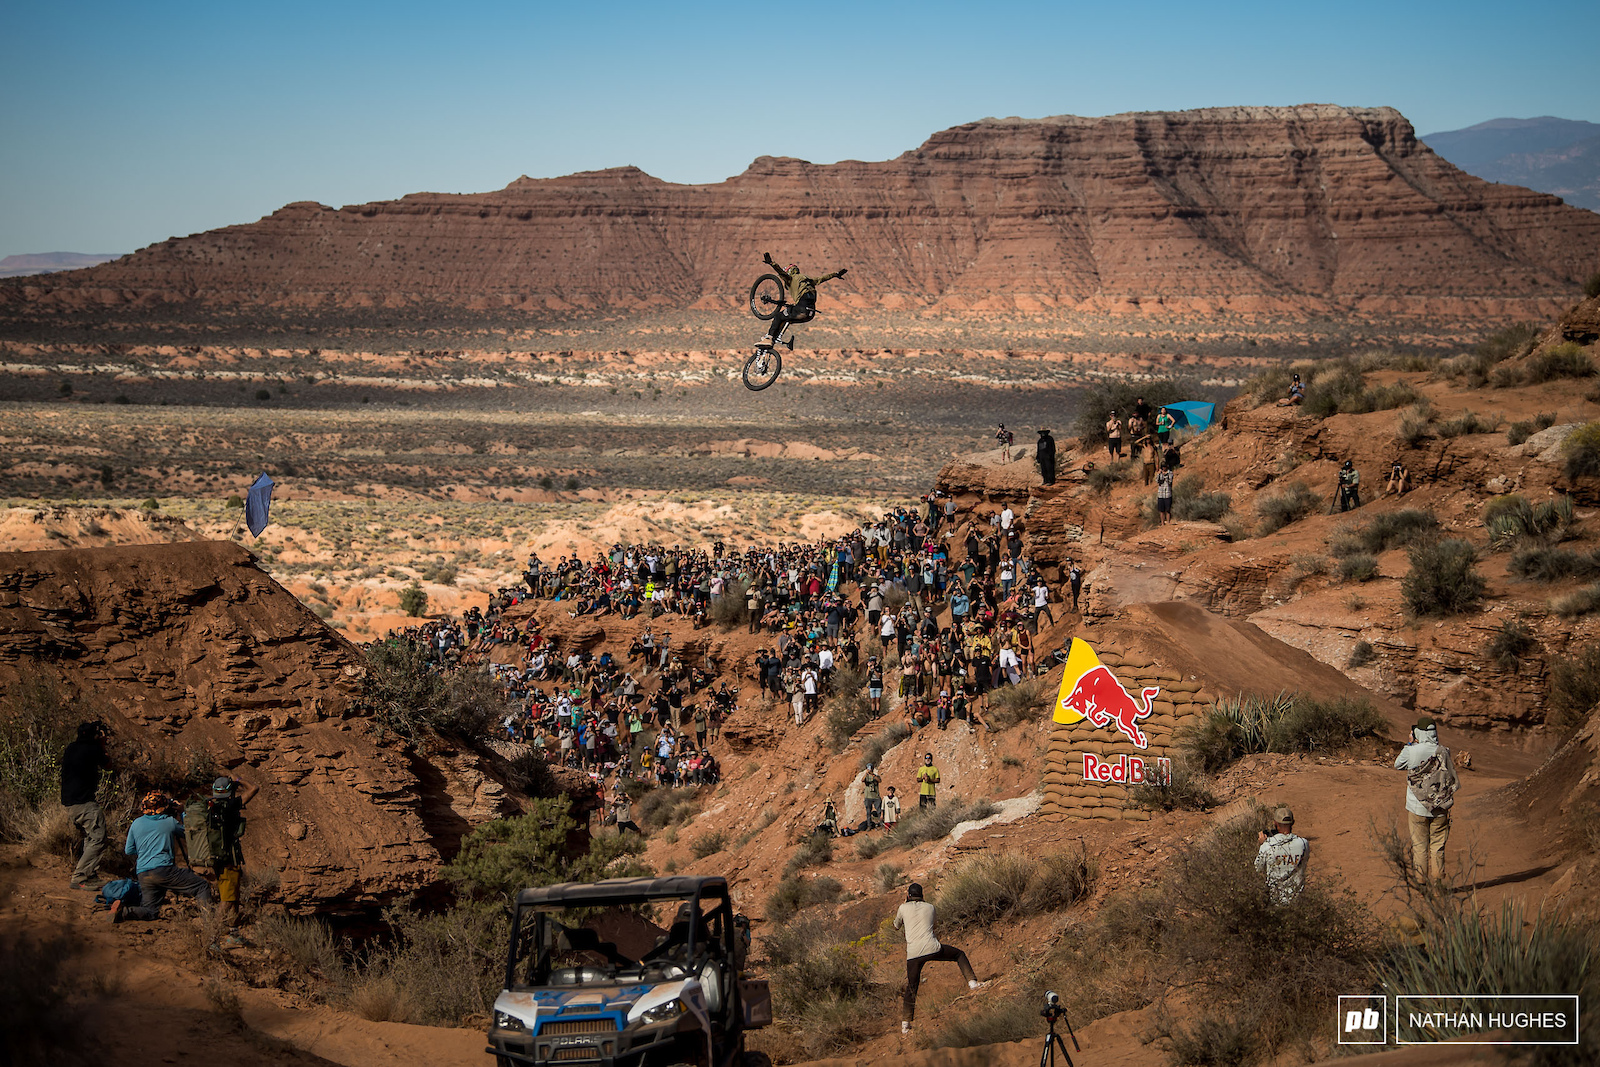 Rampage newcomer Dylan Stark with the biggest tuck-no-hander of the event by some margin.